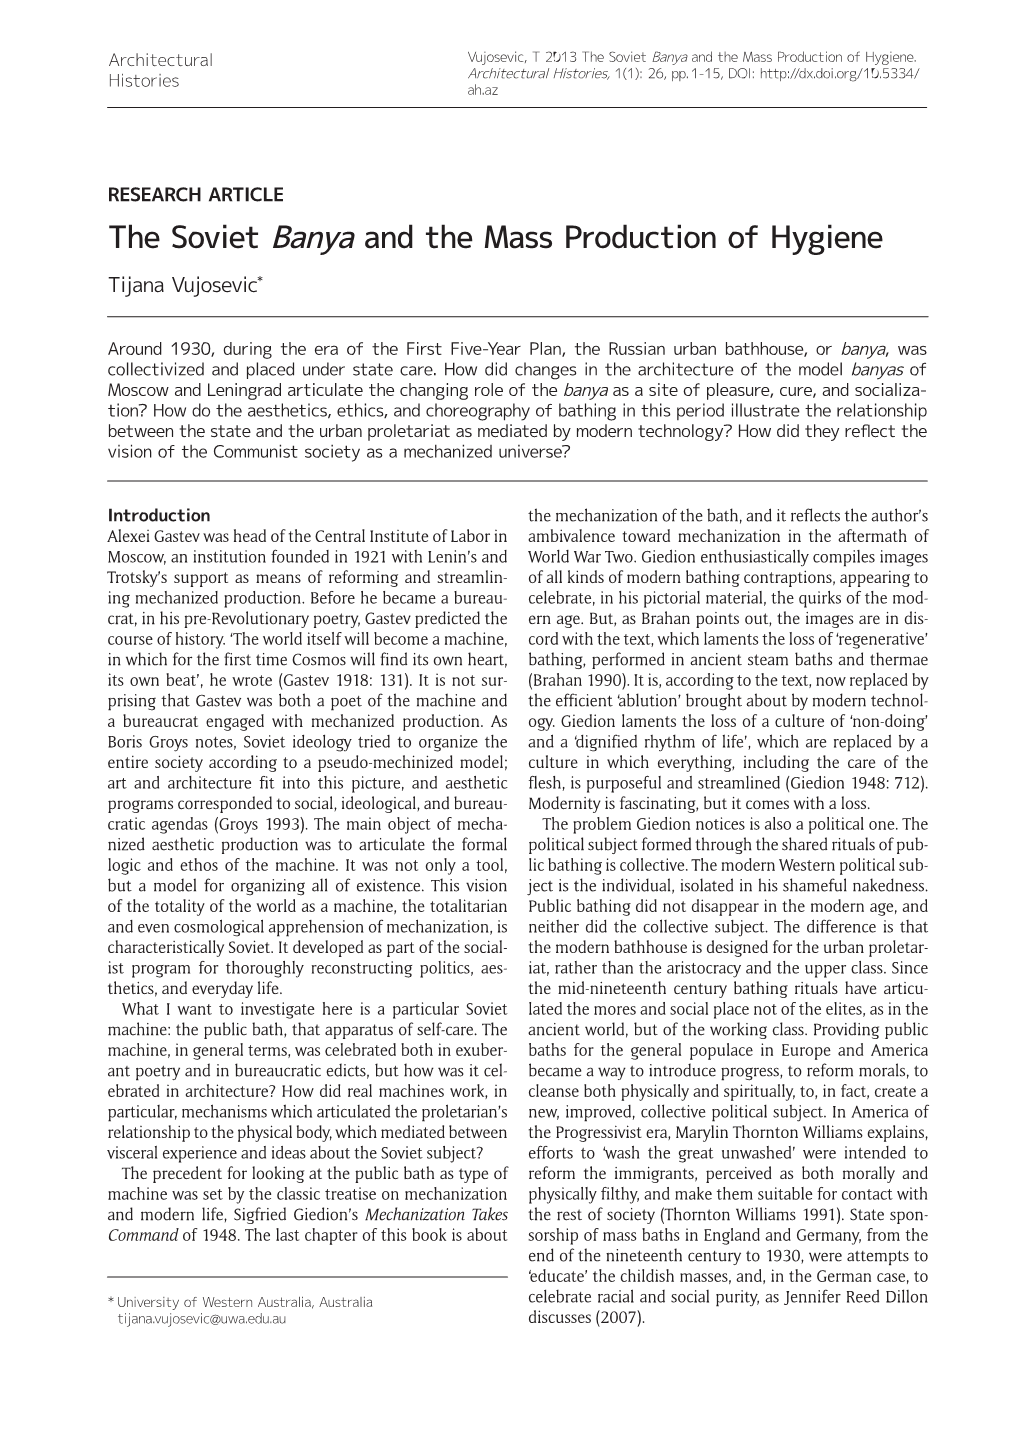 The Soviet Banya and the Mass Production of Hygiene